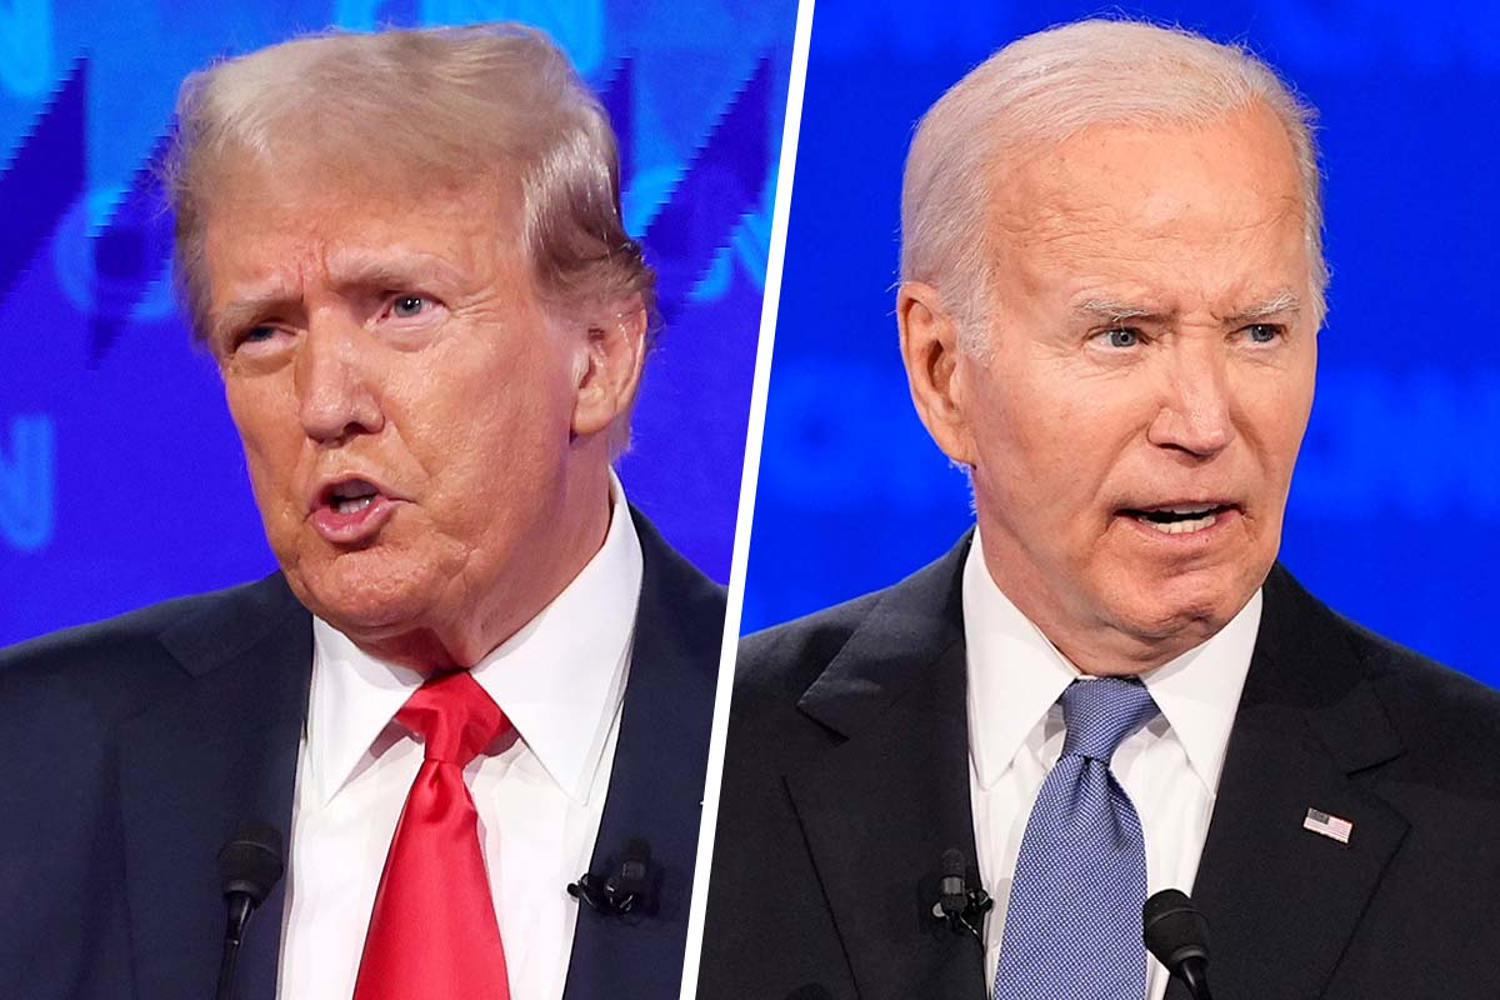 Biden’s shaky debate performance doesn’t mean he’s dropping out